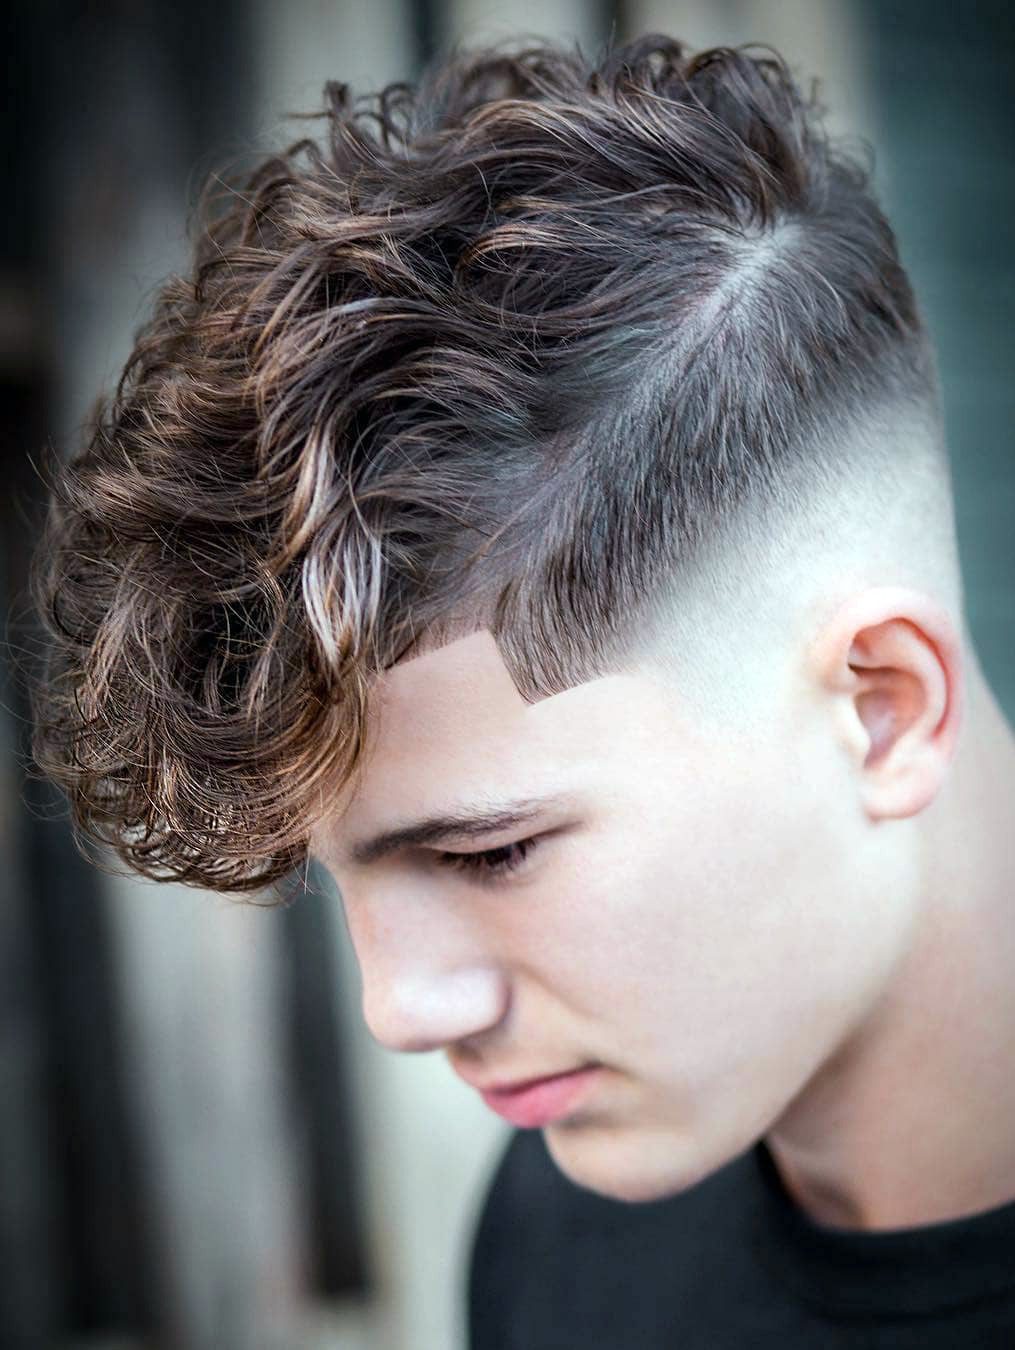 40 Modern Men S Hairstyles For Curly Hair That Will Change Your Look